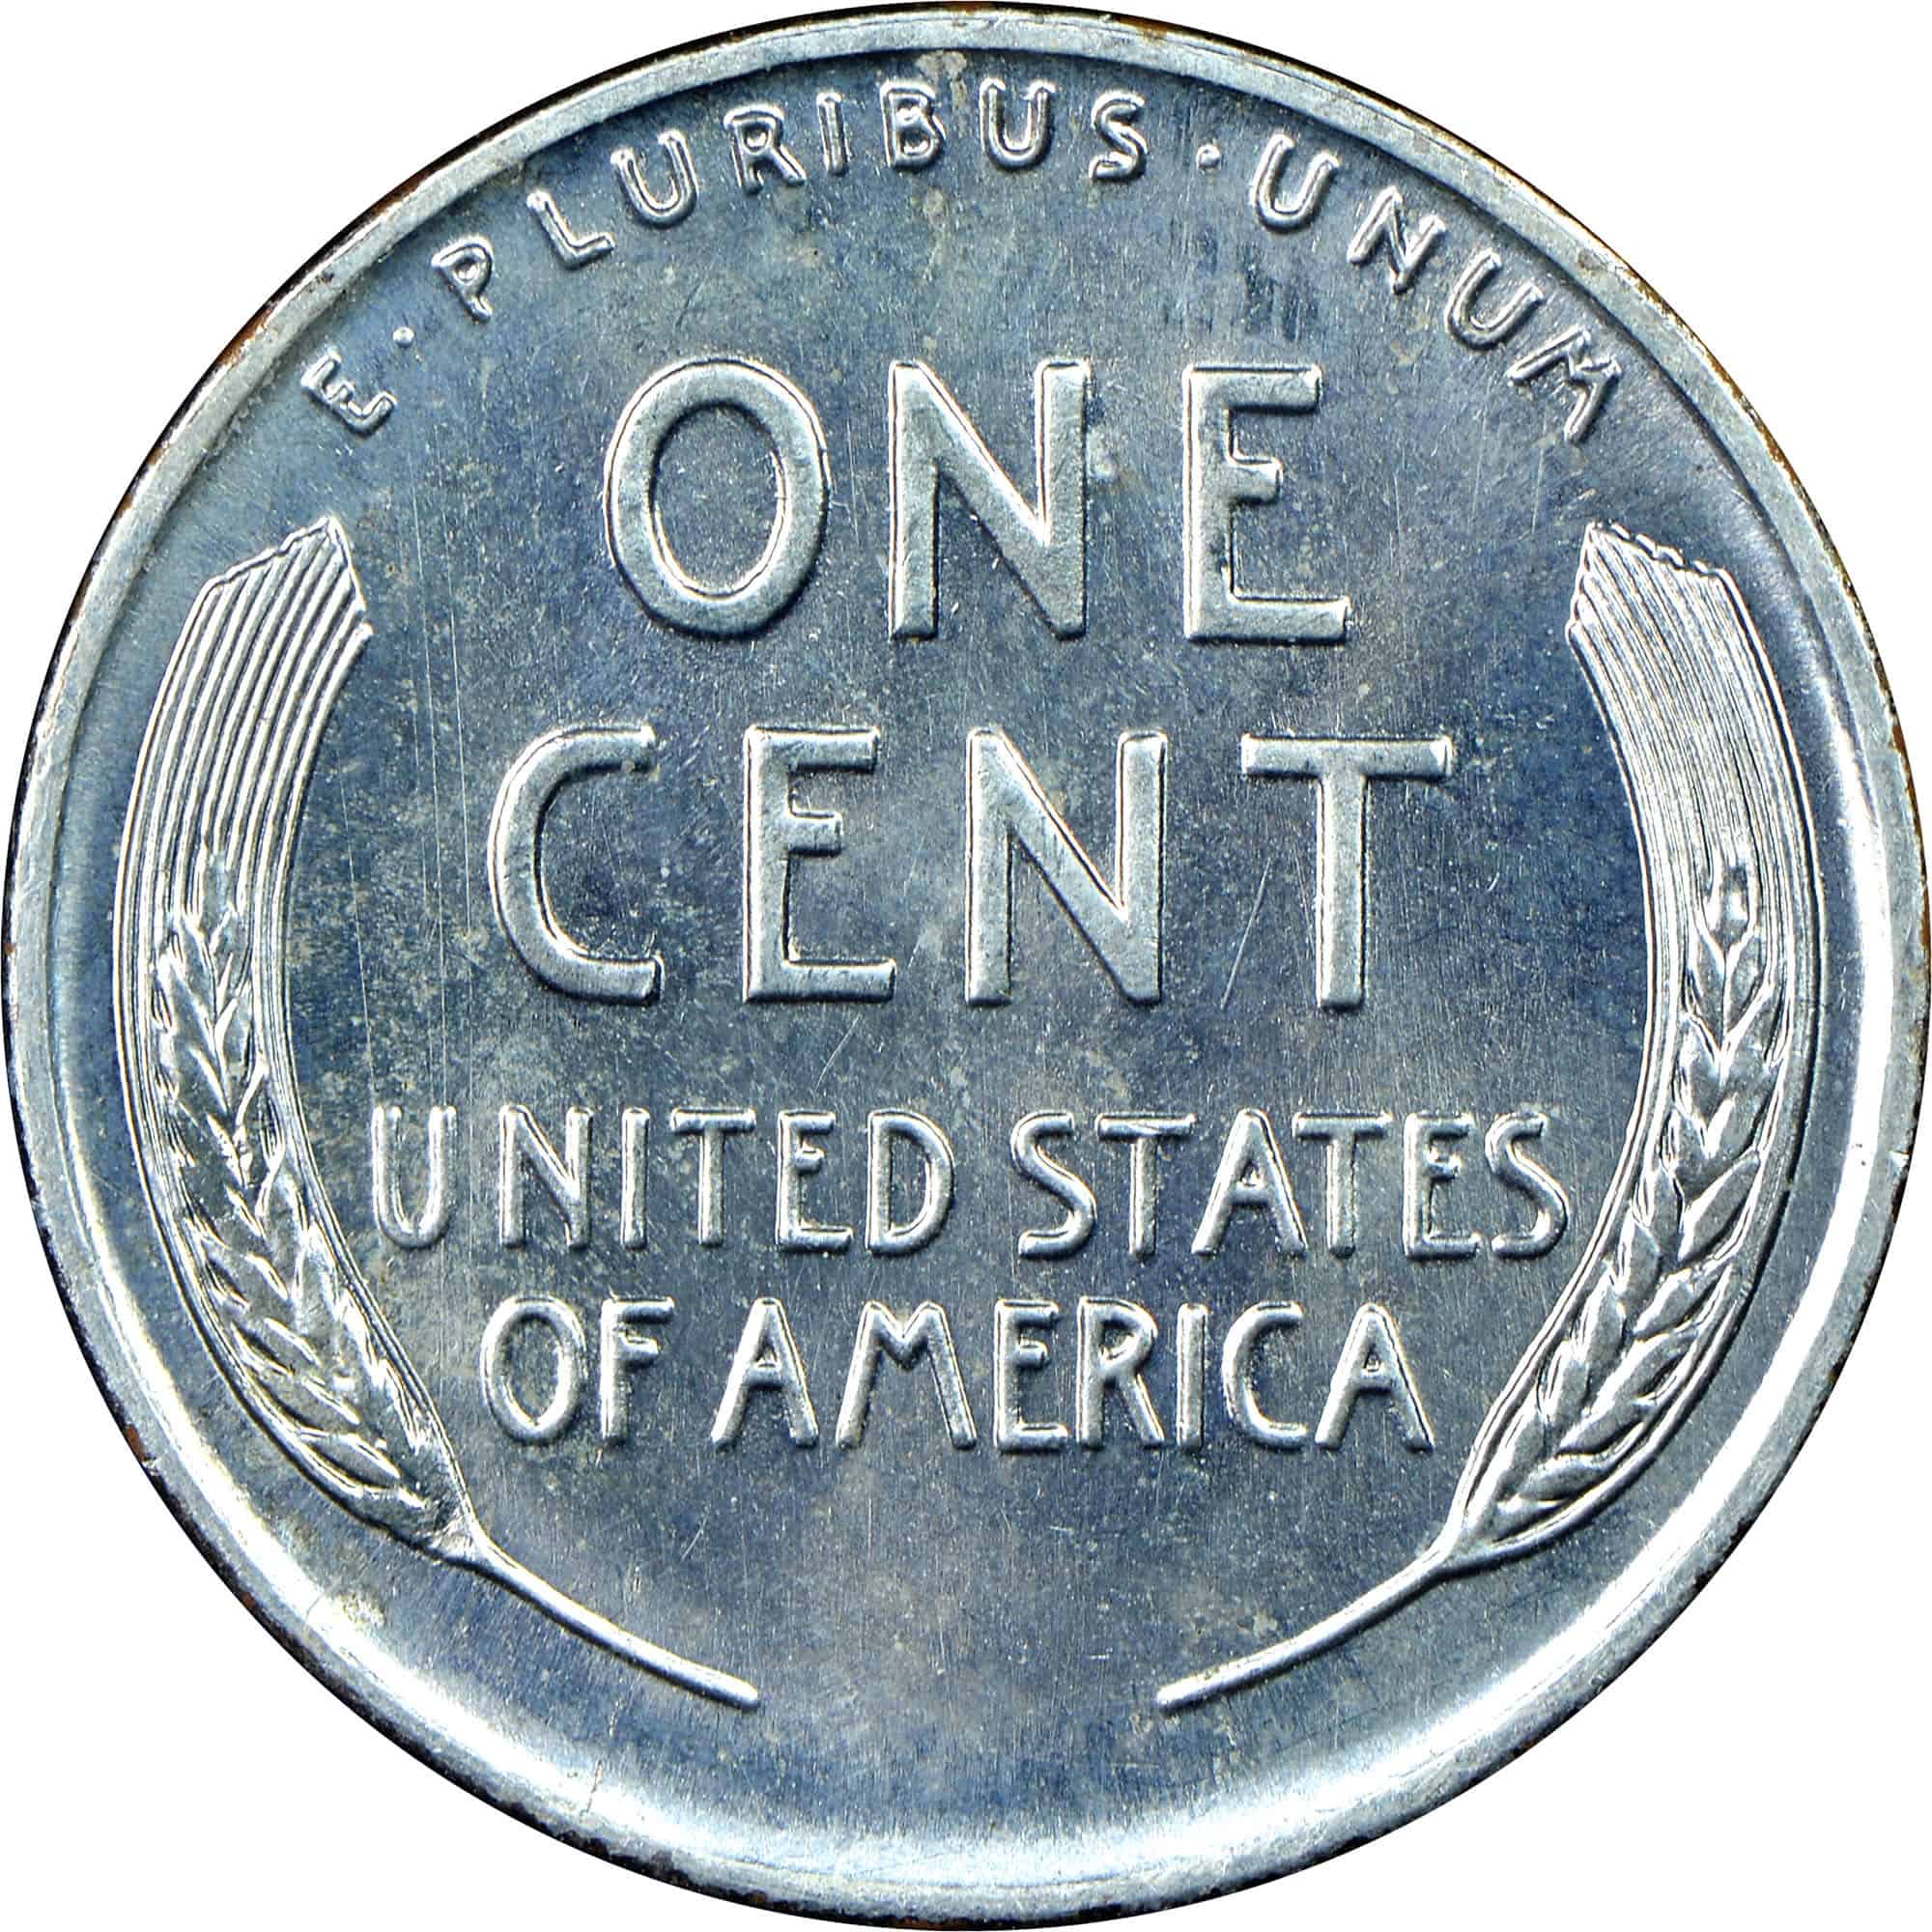 The Reverse of the 1943 Steel Penny